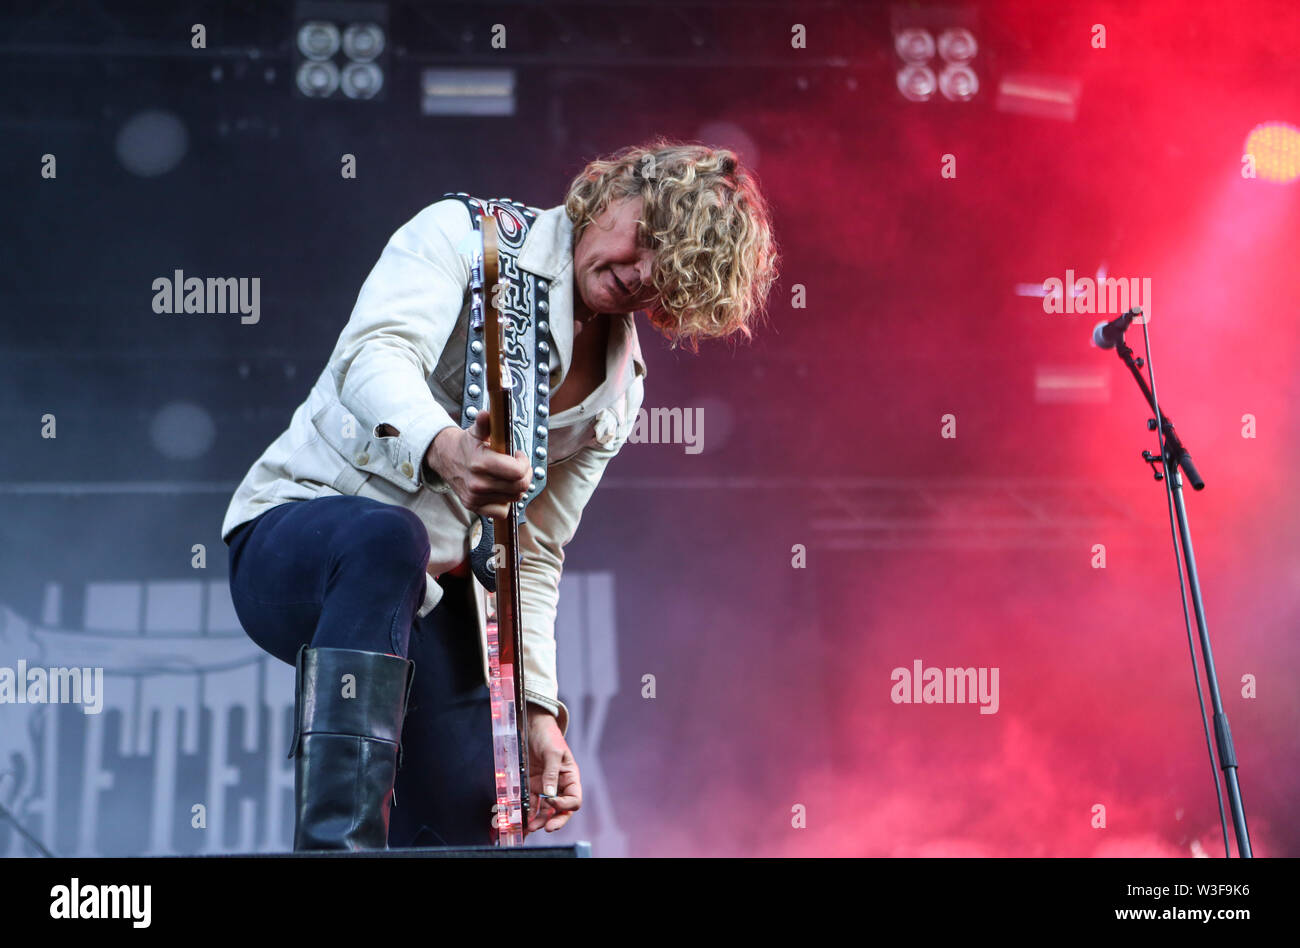 Kvinesdal, Norway - July 11th, 2019. The Danish rock band D-A-D performs a live concert during the Norwegian music festival Norway Rock Festival 2019. Here bass player Stig Pedersen is seen live on stage. (Photo credit: Gonzales Photo - Synne Nilsson). Stock Photo